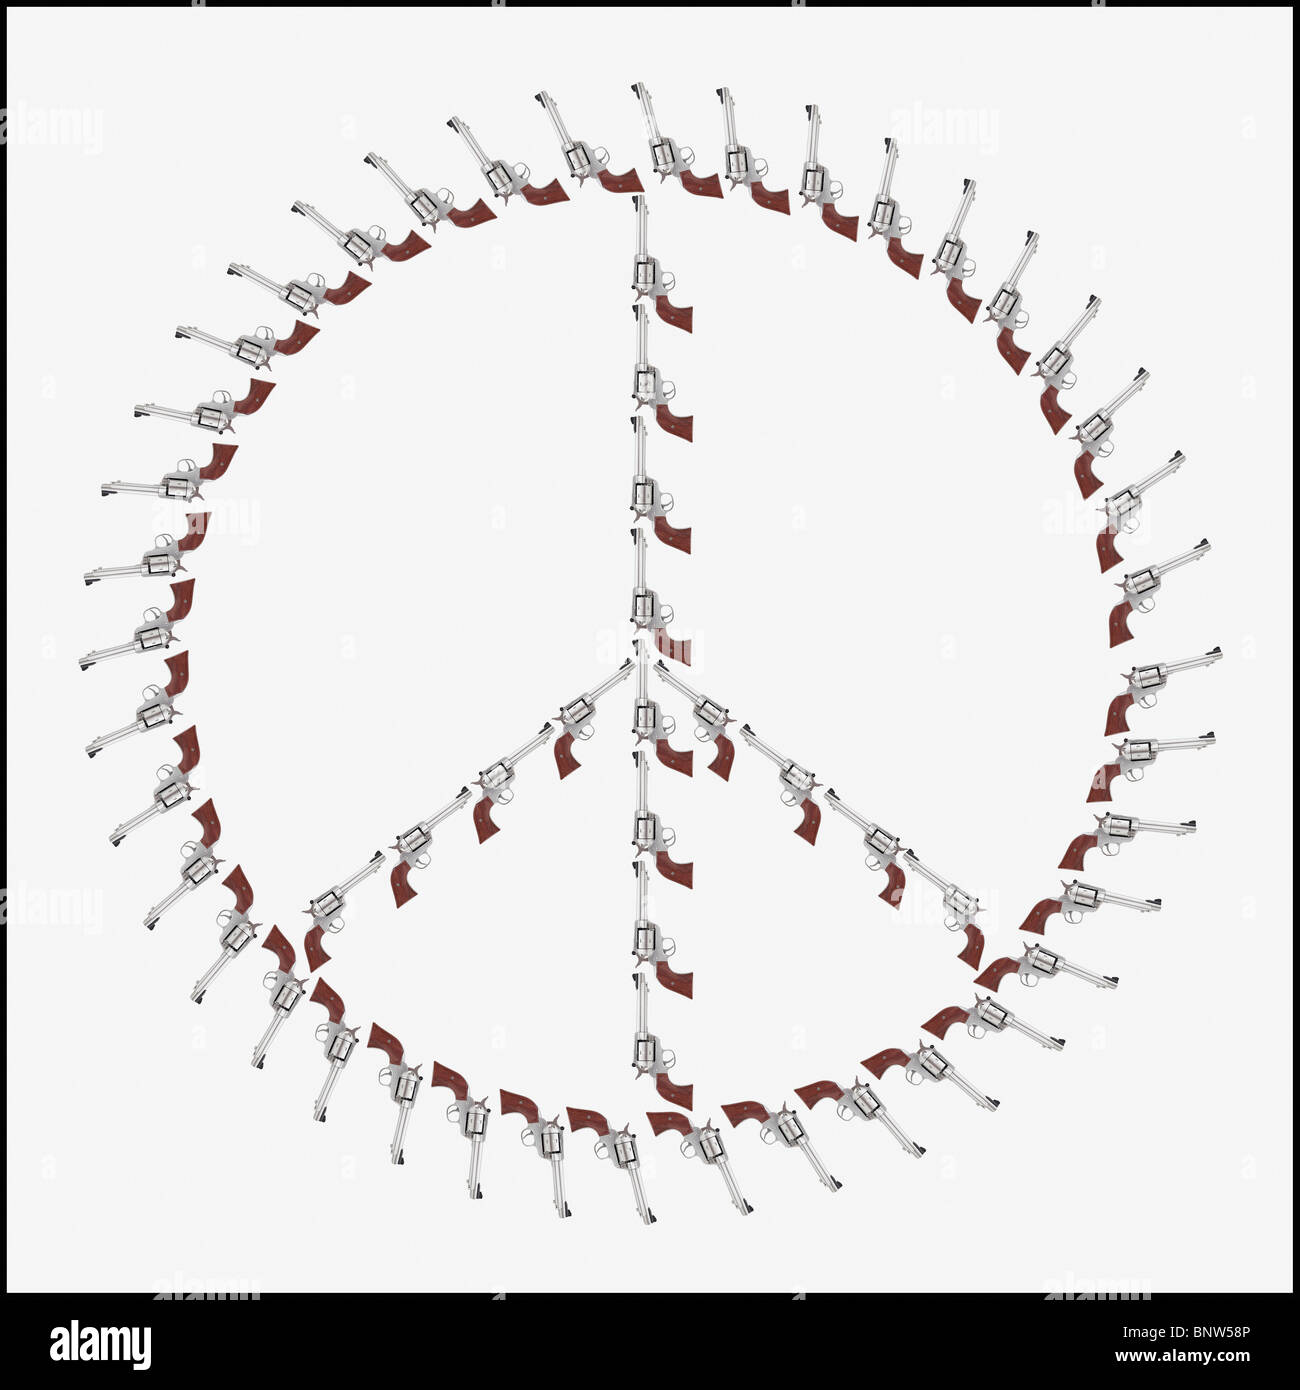 Guns arranged in the shape of a peace symbol Stock Photo